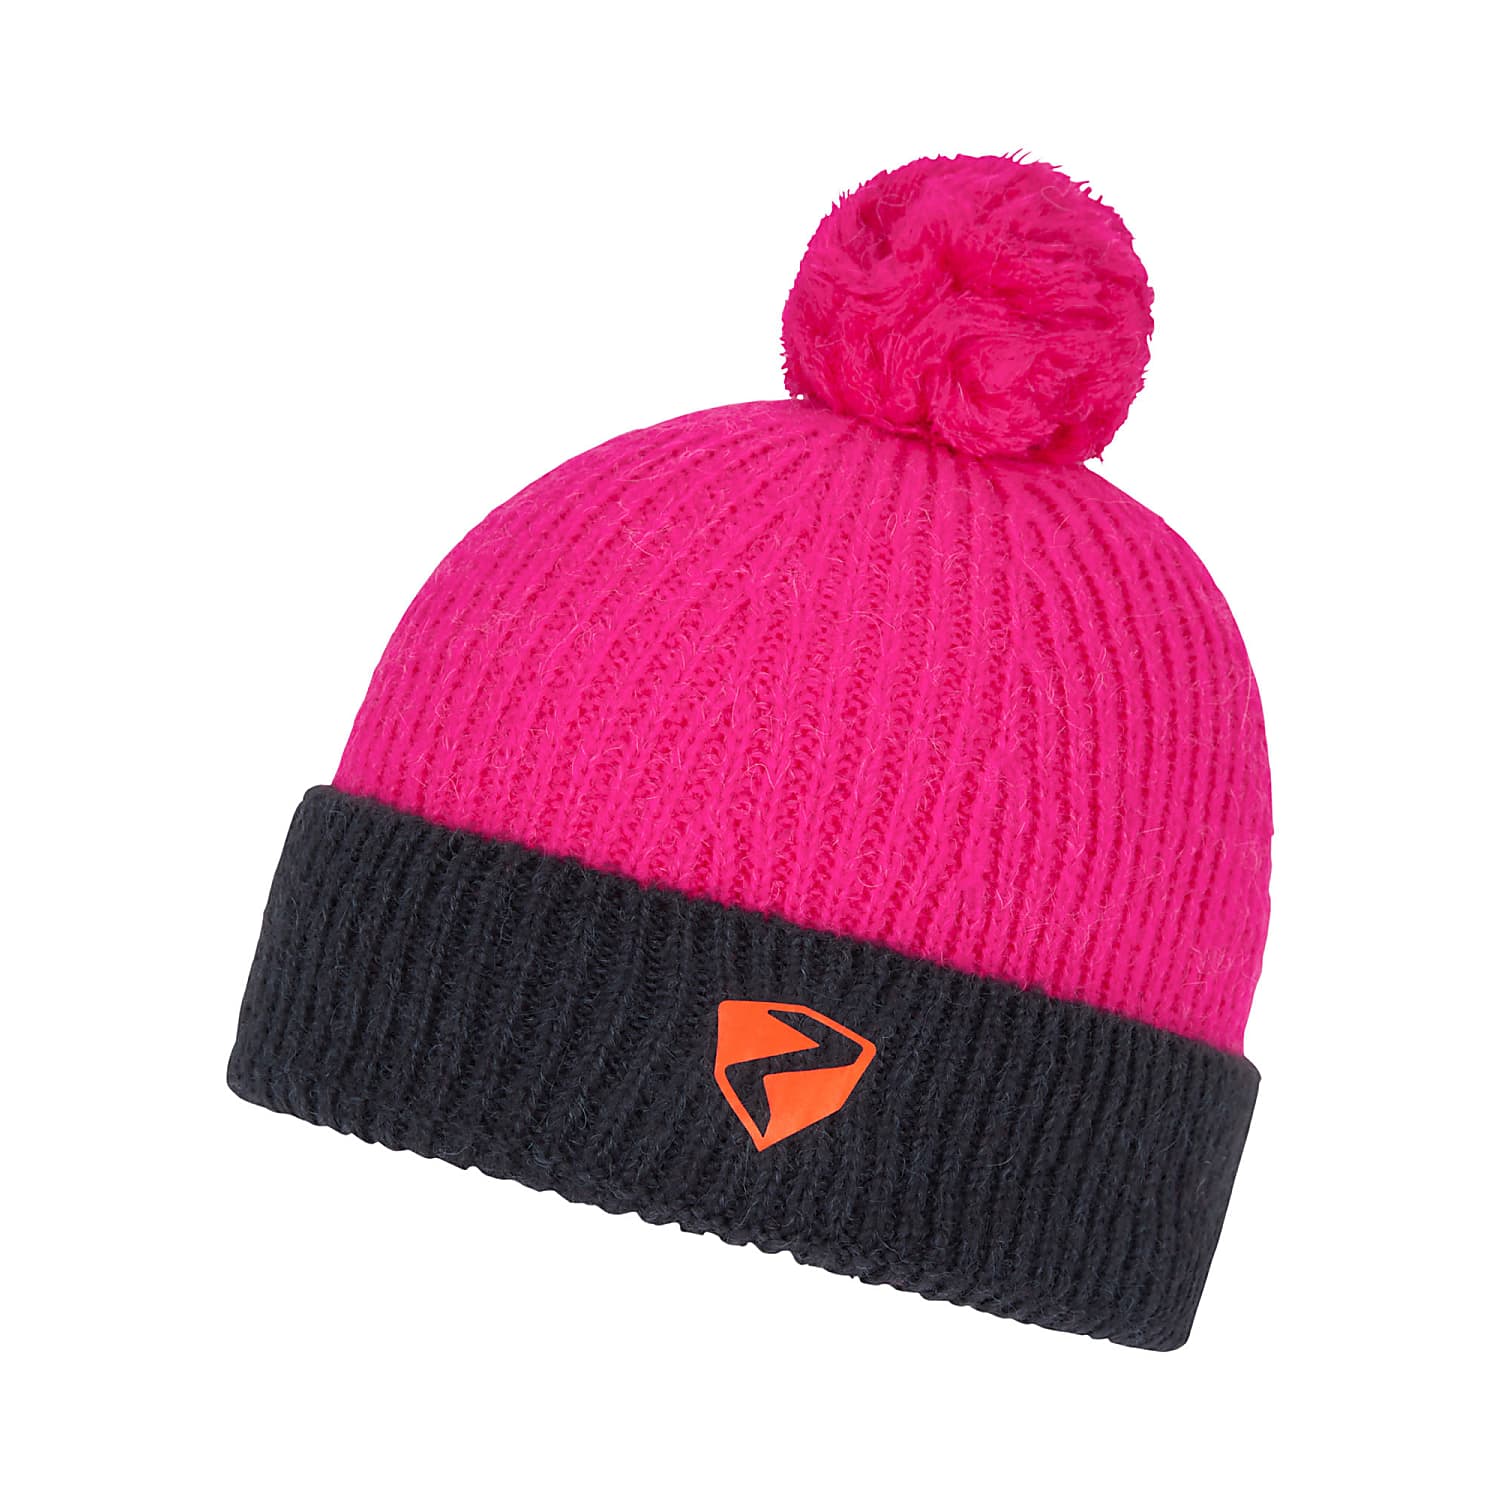 Ziener JUNIOR IKEN - Bright MODEL), HAT (PREVIOUS and Pink shipping cheap Fast